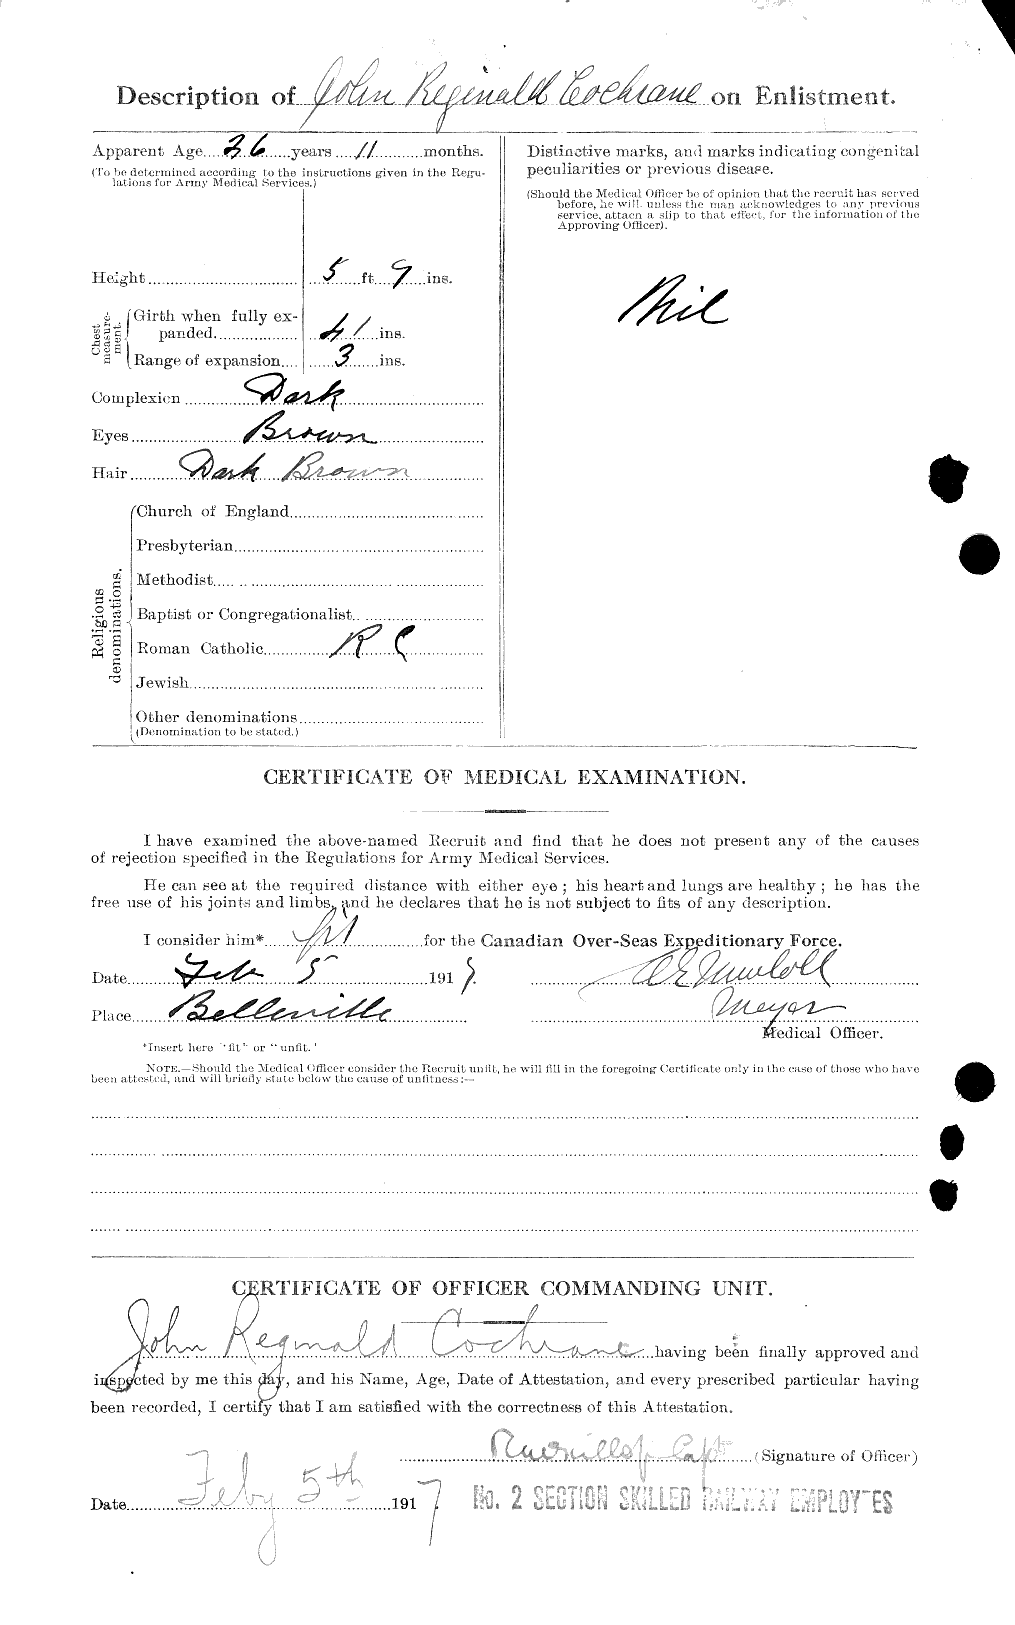 Personnel Records of the First World War - CEF 026421b